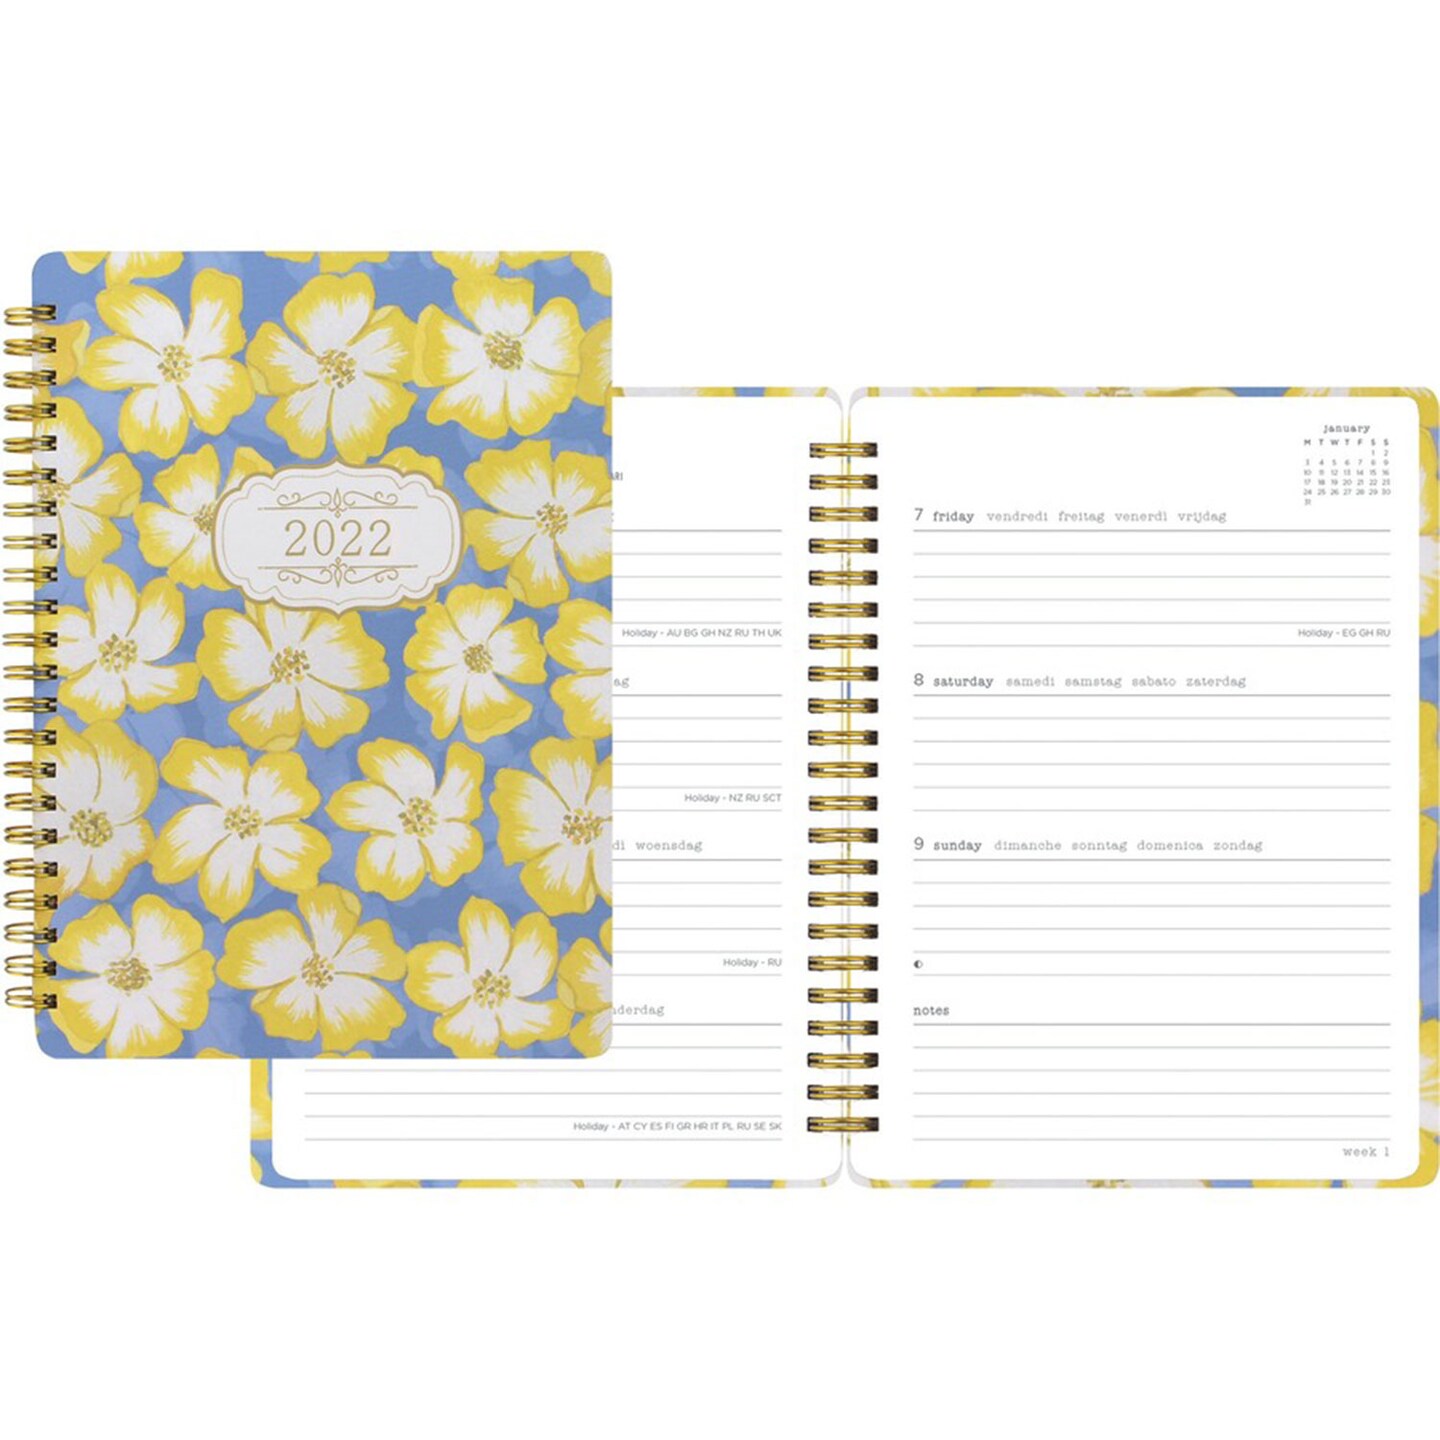 Letts Of London Bloom Design Planner, Weekly, 1 Year, January 2021 till December 2021, Twin Wire, Yellow, Daily Block, Durable Cover, Page Marker